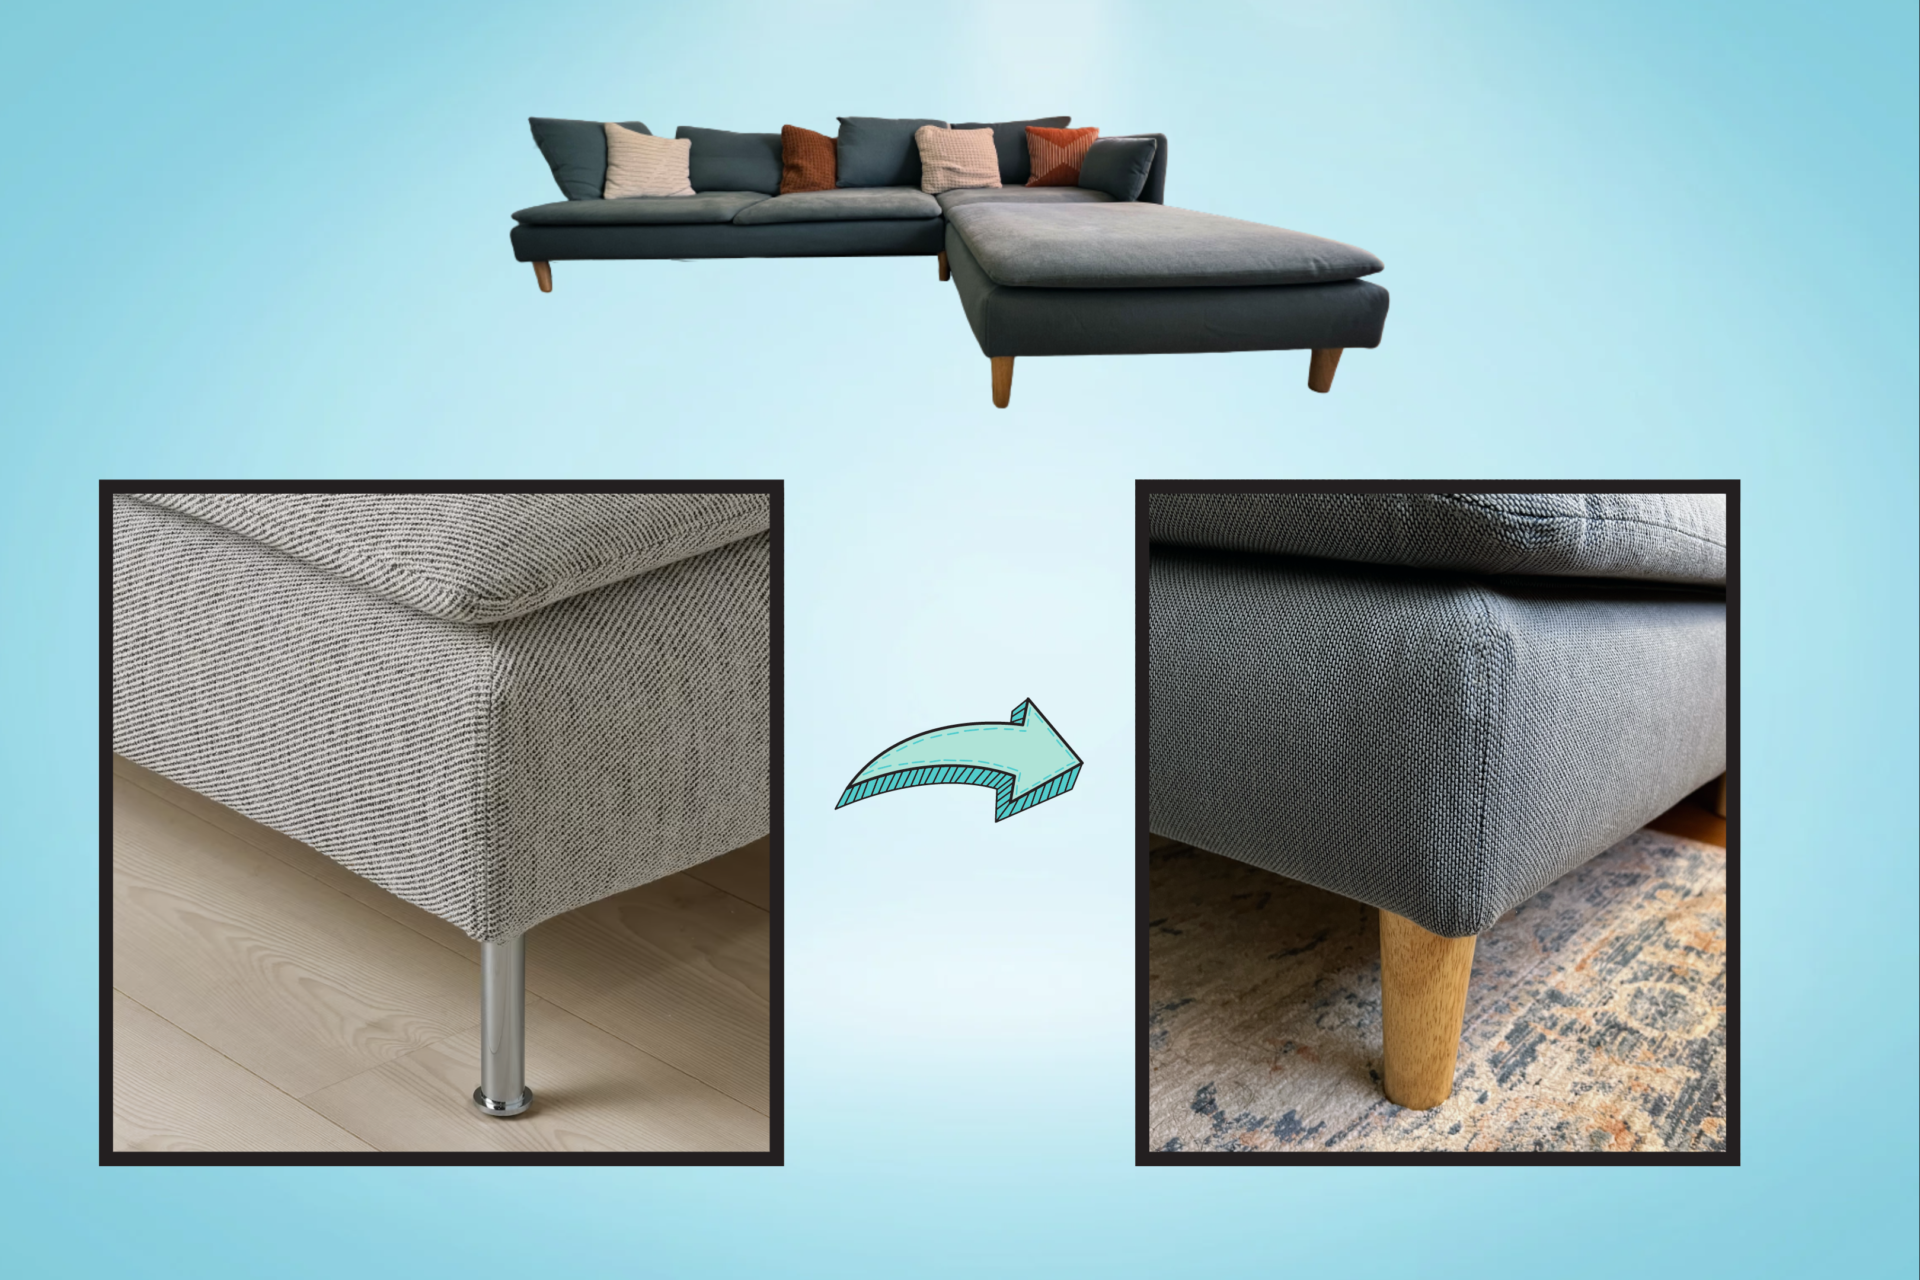 Comparison showing the stock Ikea metal leg and the alternative that I put on, with a whole sectional above